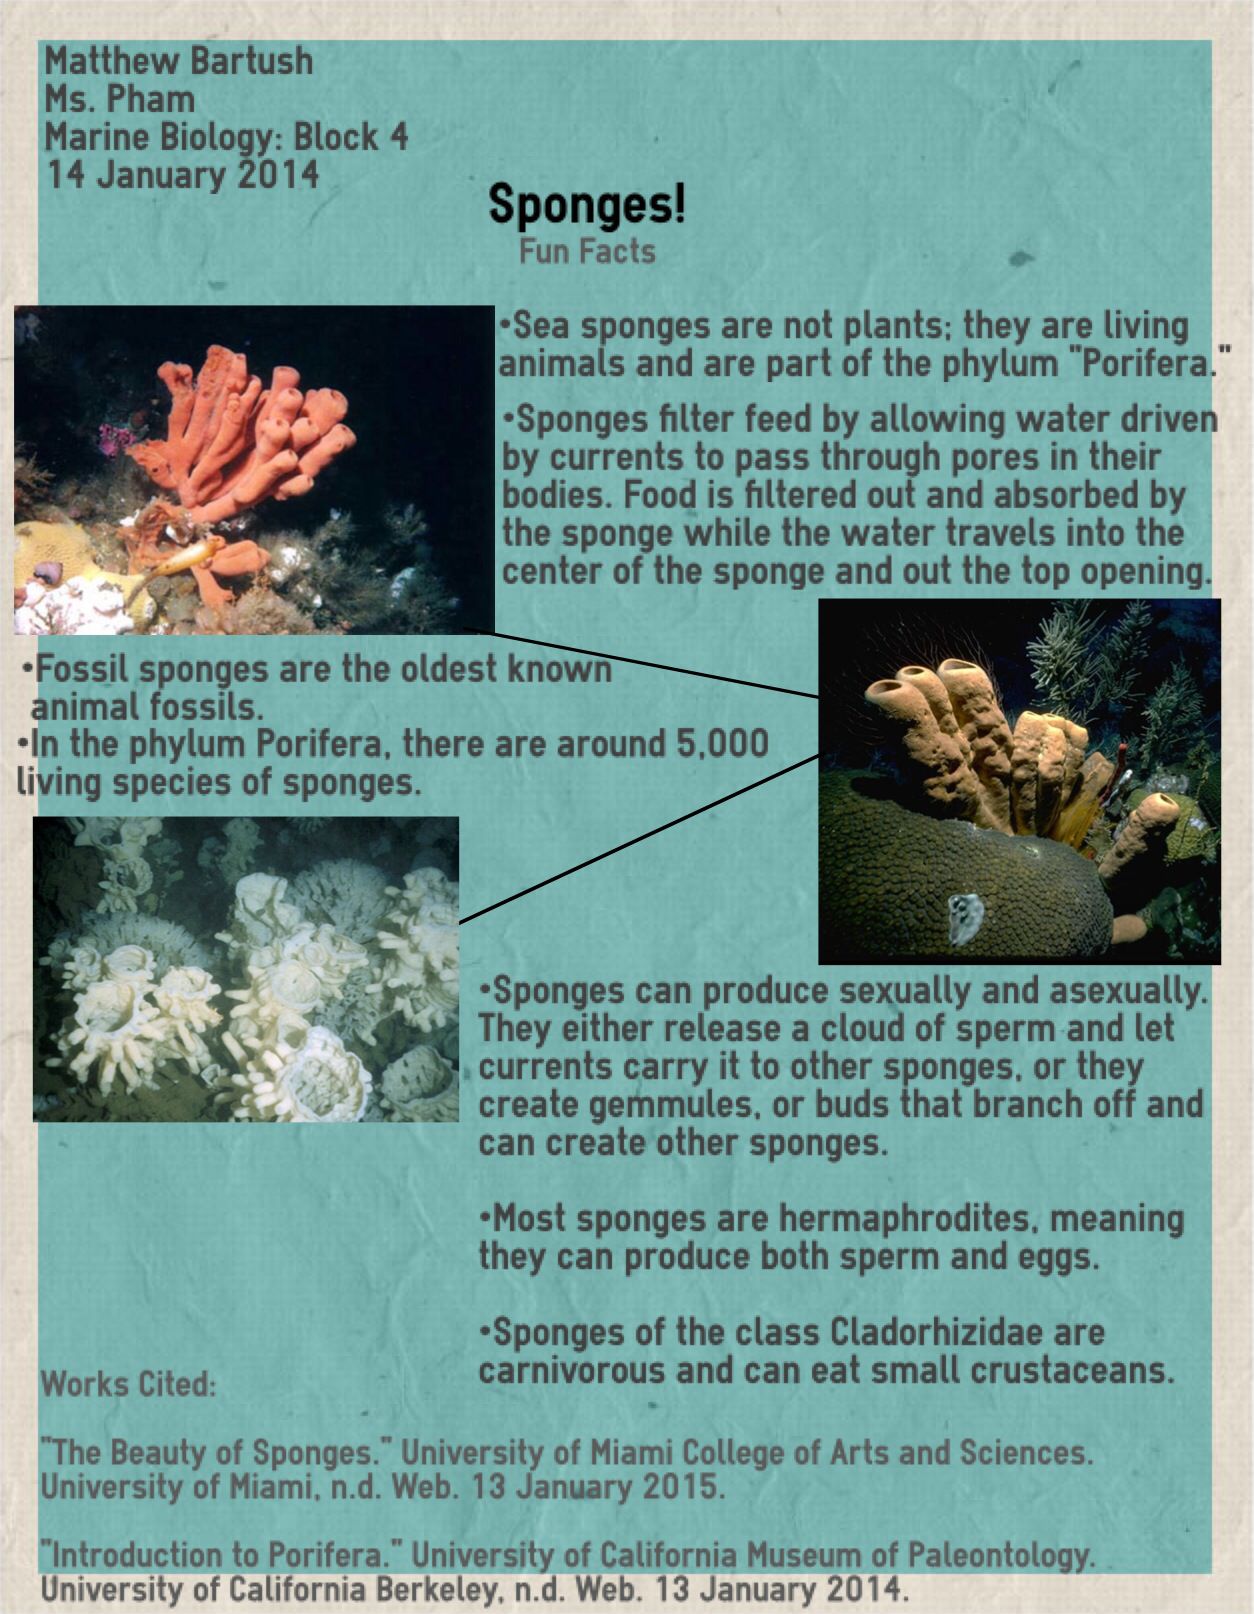 What are facts about sponges?